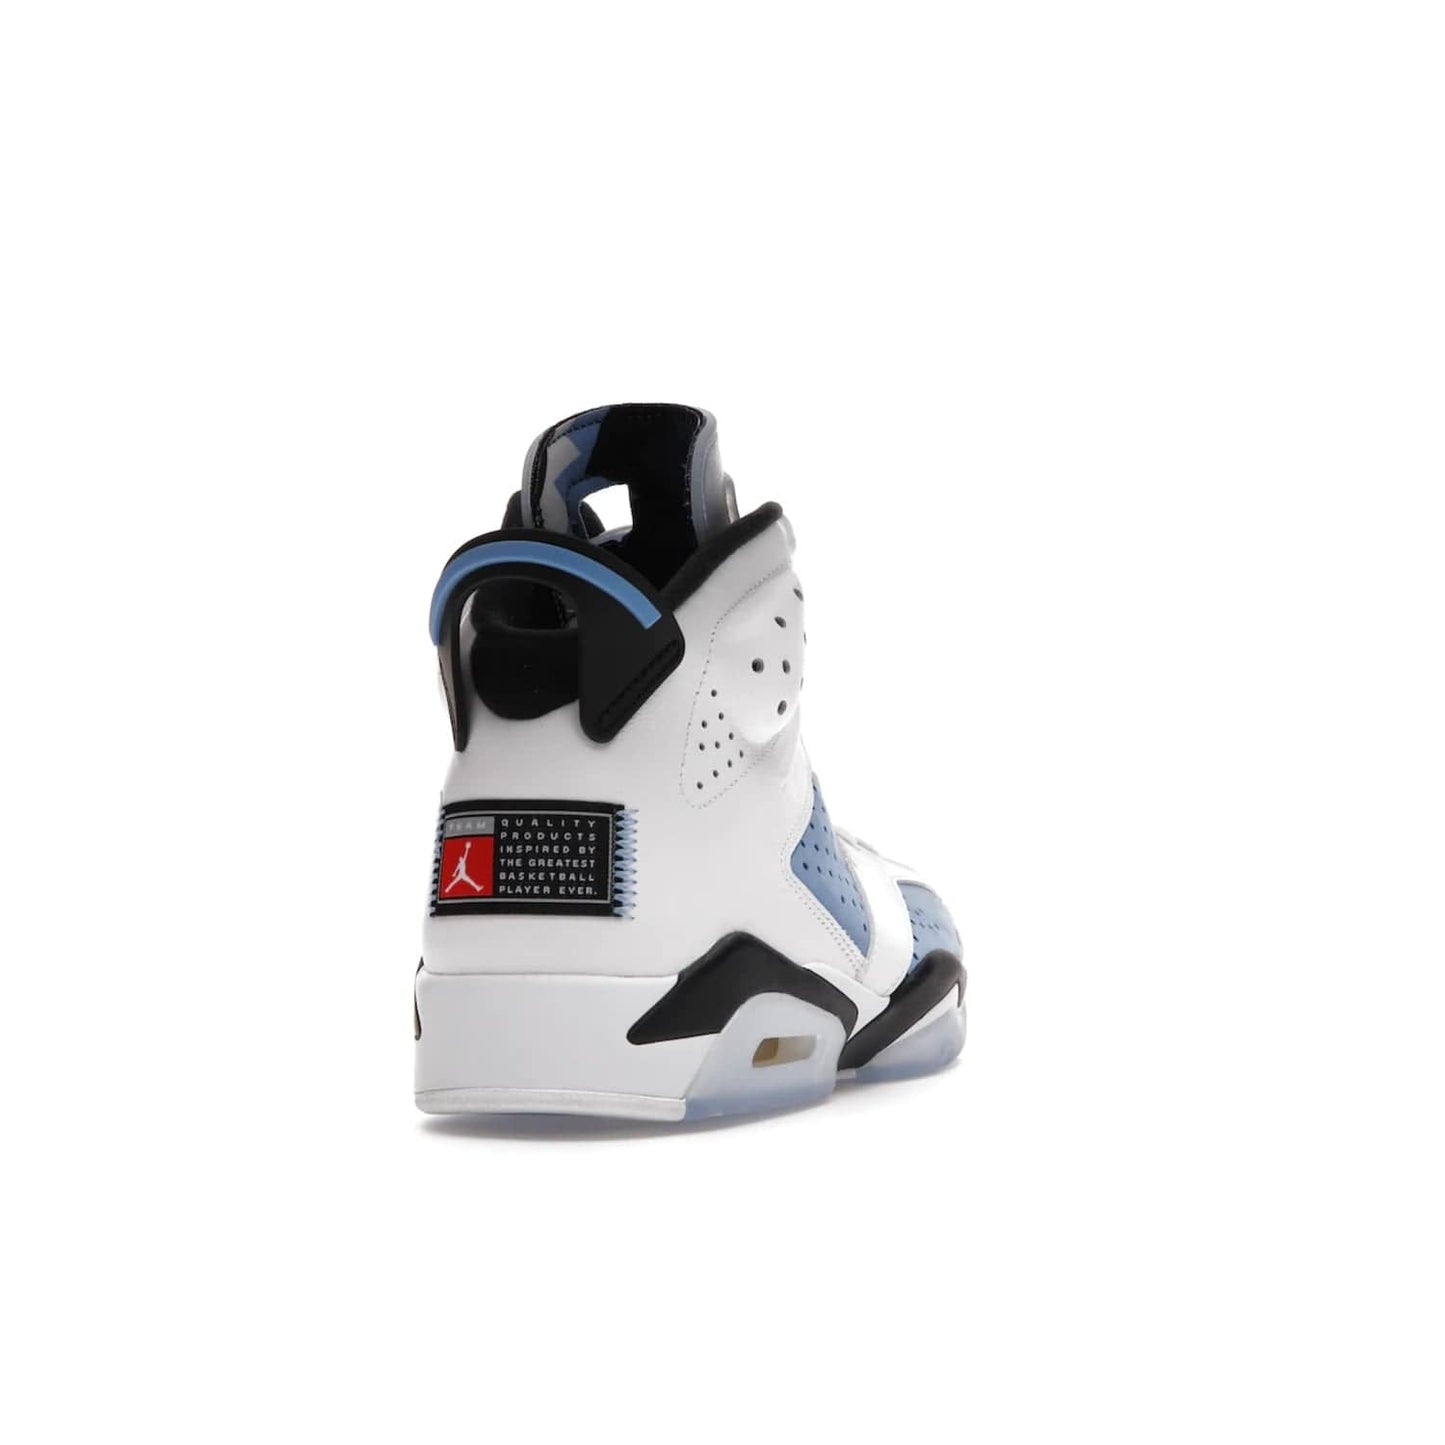 Jordan 6 Retro UNC White - Image 30 - Only at www.BallersClubKickz.com - Air Jordan 6 Retro UNC White with classic UNC colors brings nostalgia and style to a legendary silhouette. Celebrate MJ's alma mater with navy blue accents, icy semi-translucent sole and Jordan Team patch. Out March 2022 for the Sneaker Enthusiast.